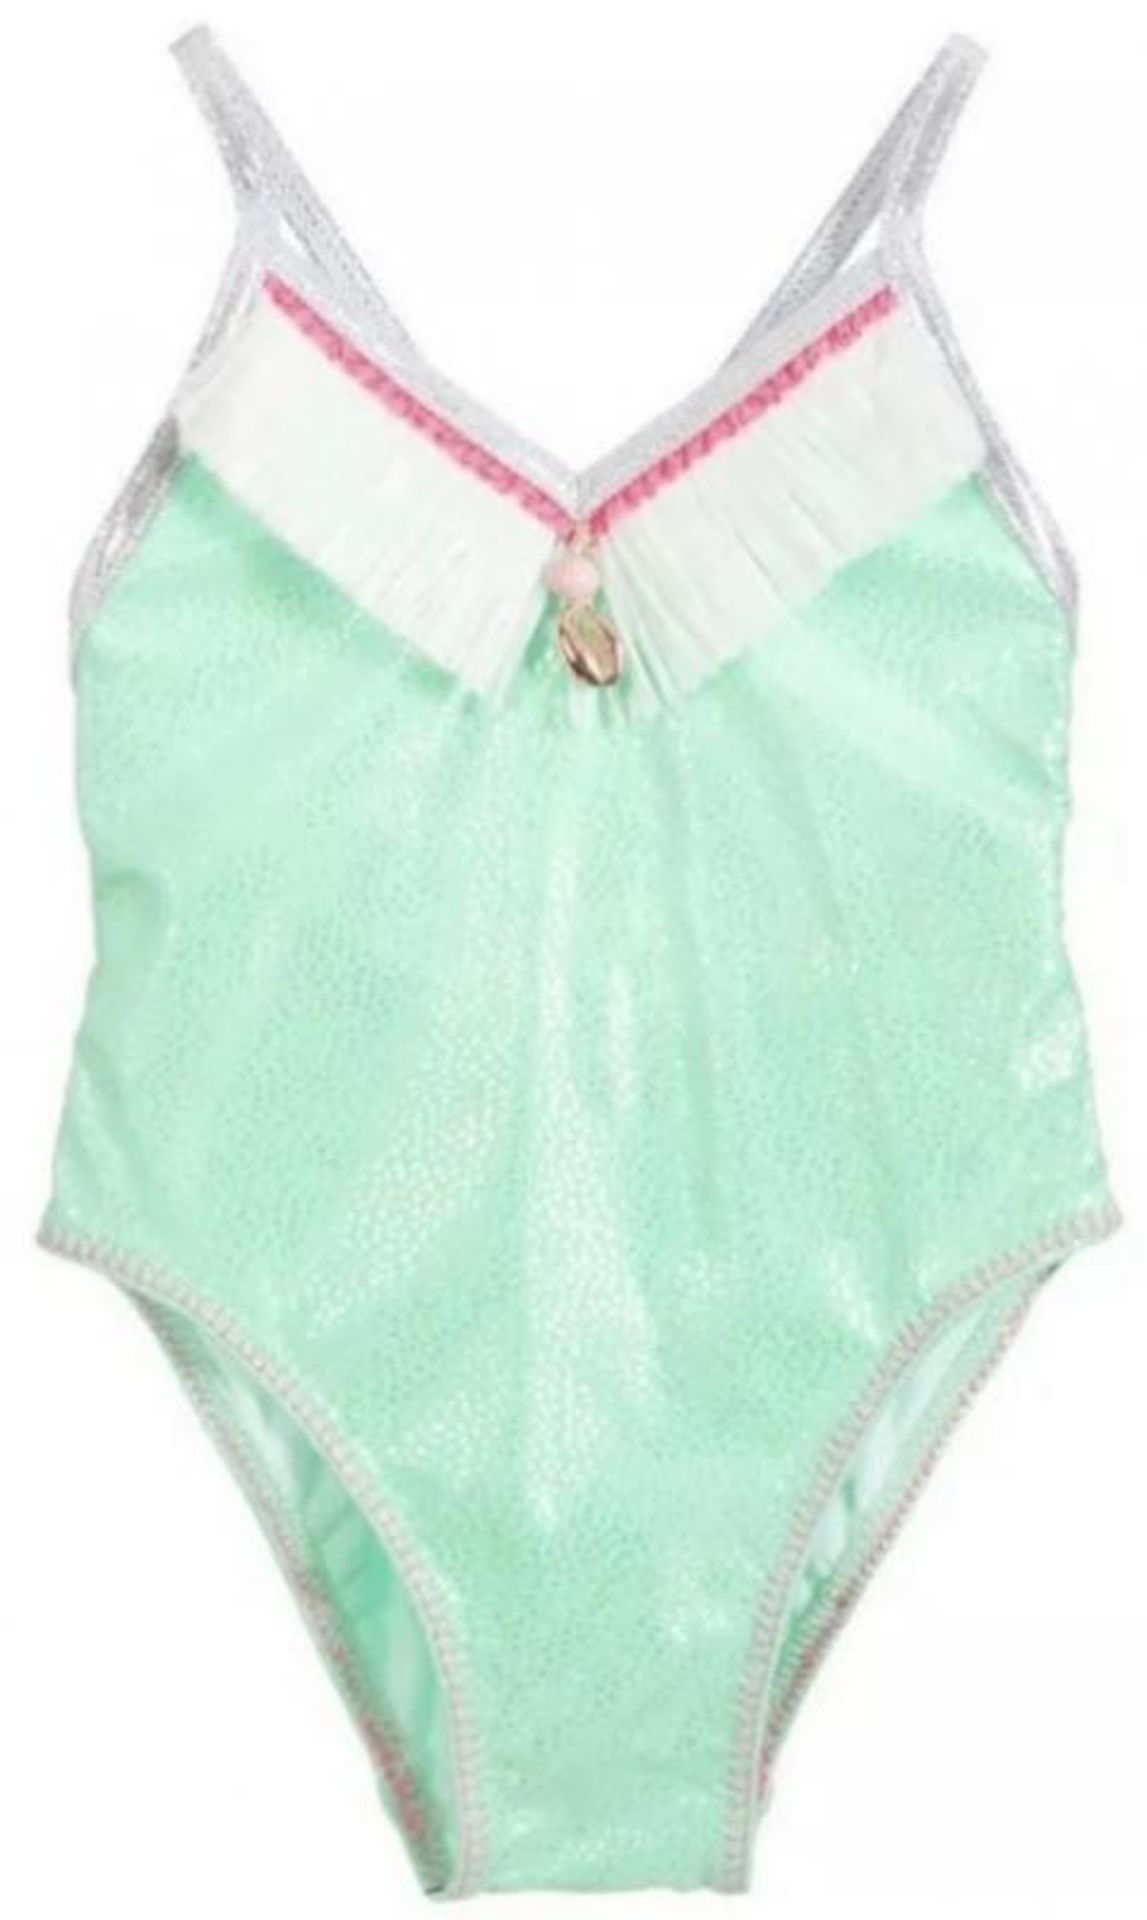 1 x PATE DE SABLE Swimsuit - New With Tags - Size: 10A - Ref: BSUSI9 - CL580 - NO VAT ON THE HAMM